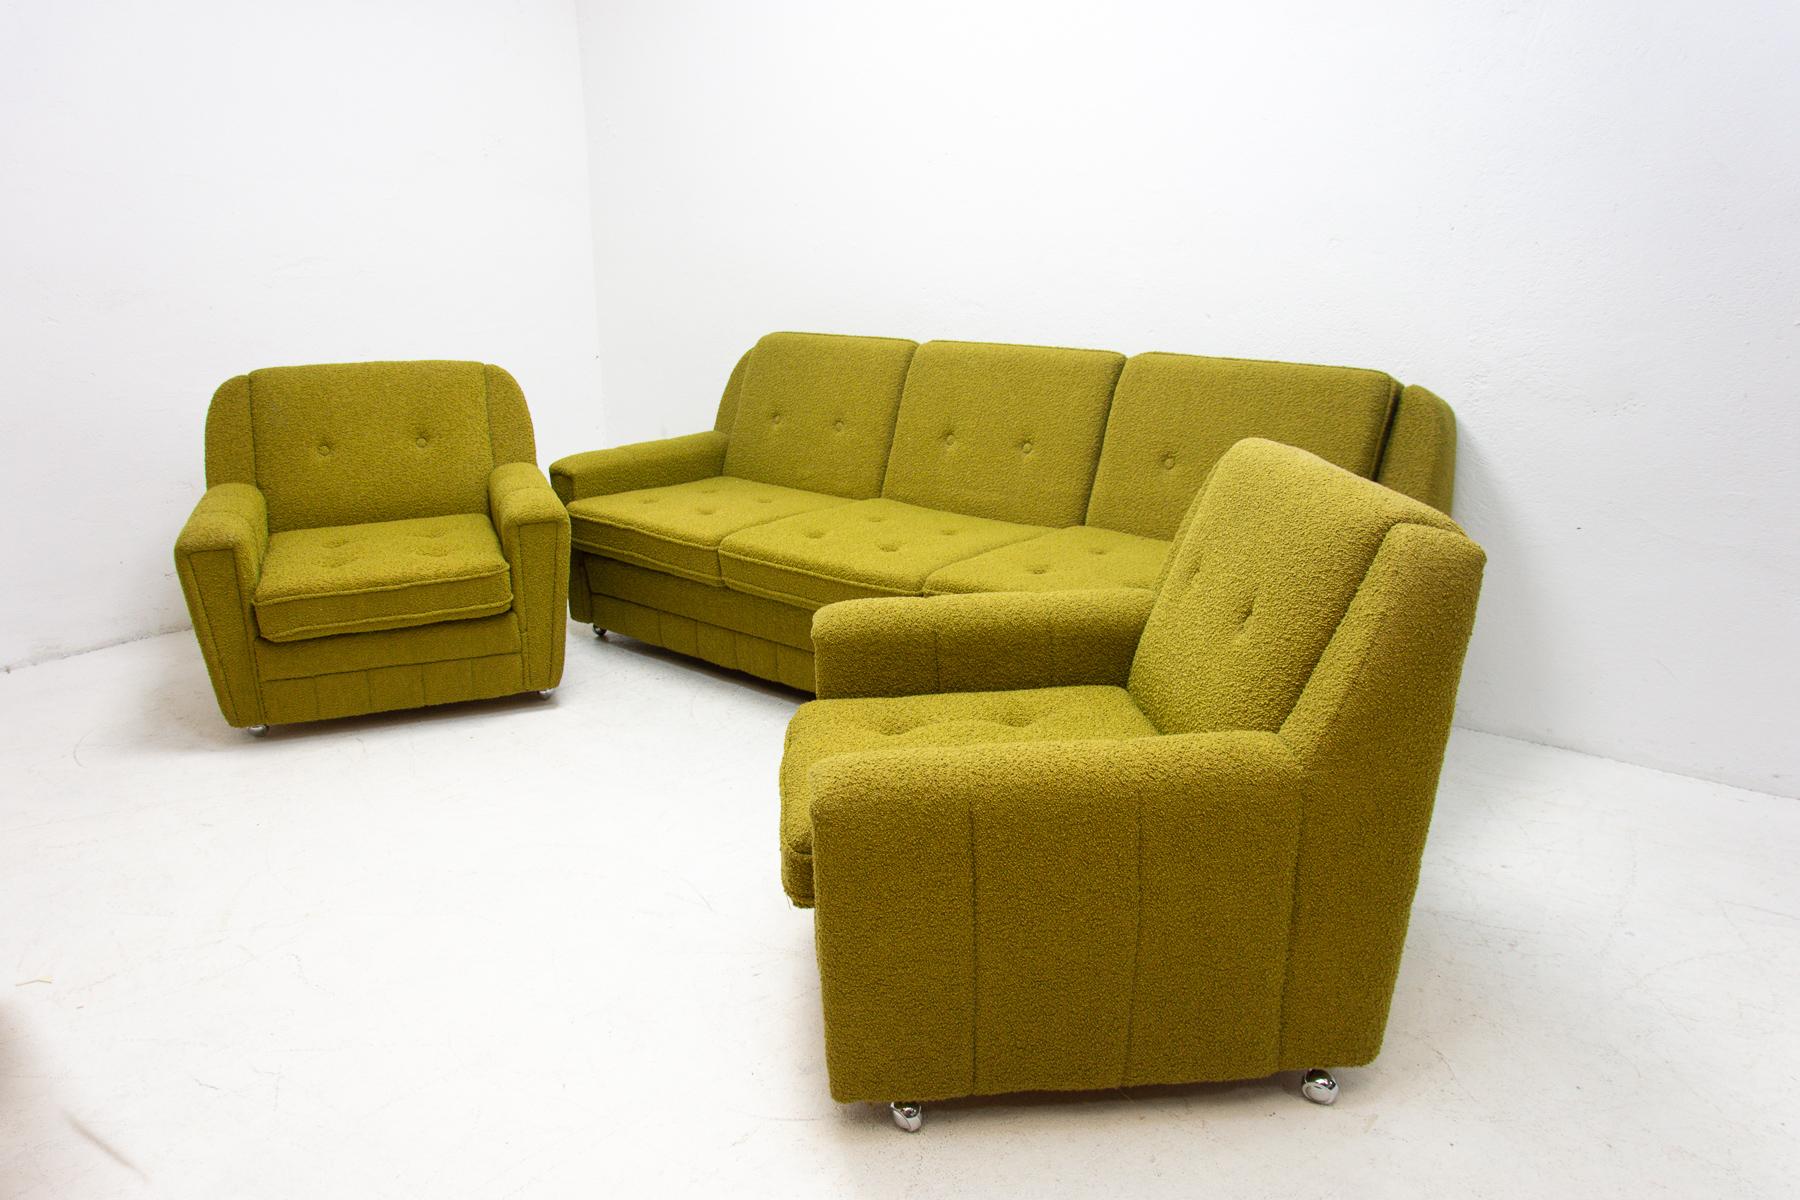 This living room set is a typical example of furniture design of the 1970/1980´s in the former Czechoslovakia. It was made by JITONA company and this living set was one of the most sought after in Czechoslovakia and was one of the few to be exported